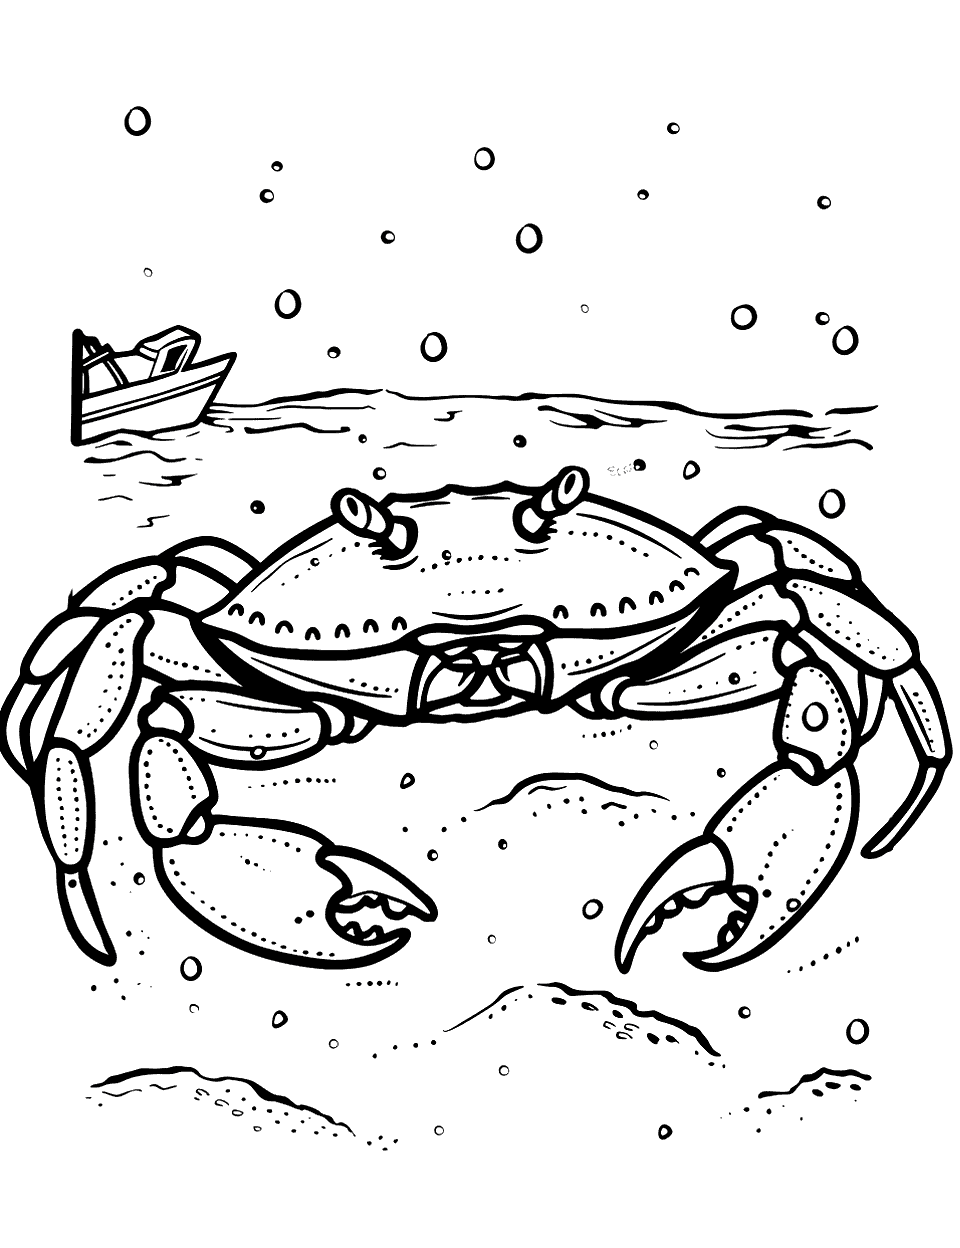 Snow Crab in Summer Coloring Page - A snow crab on sand by the ocean, contrasting the usual summer beach scene.